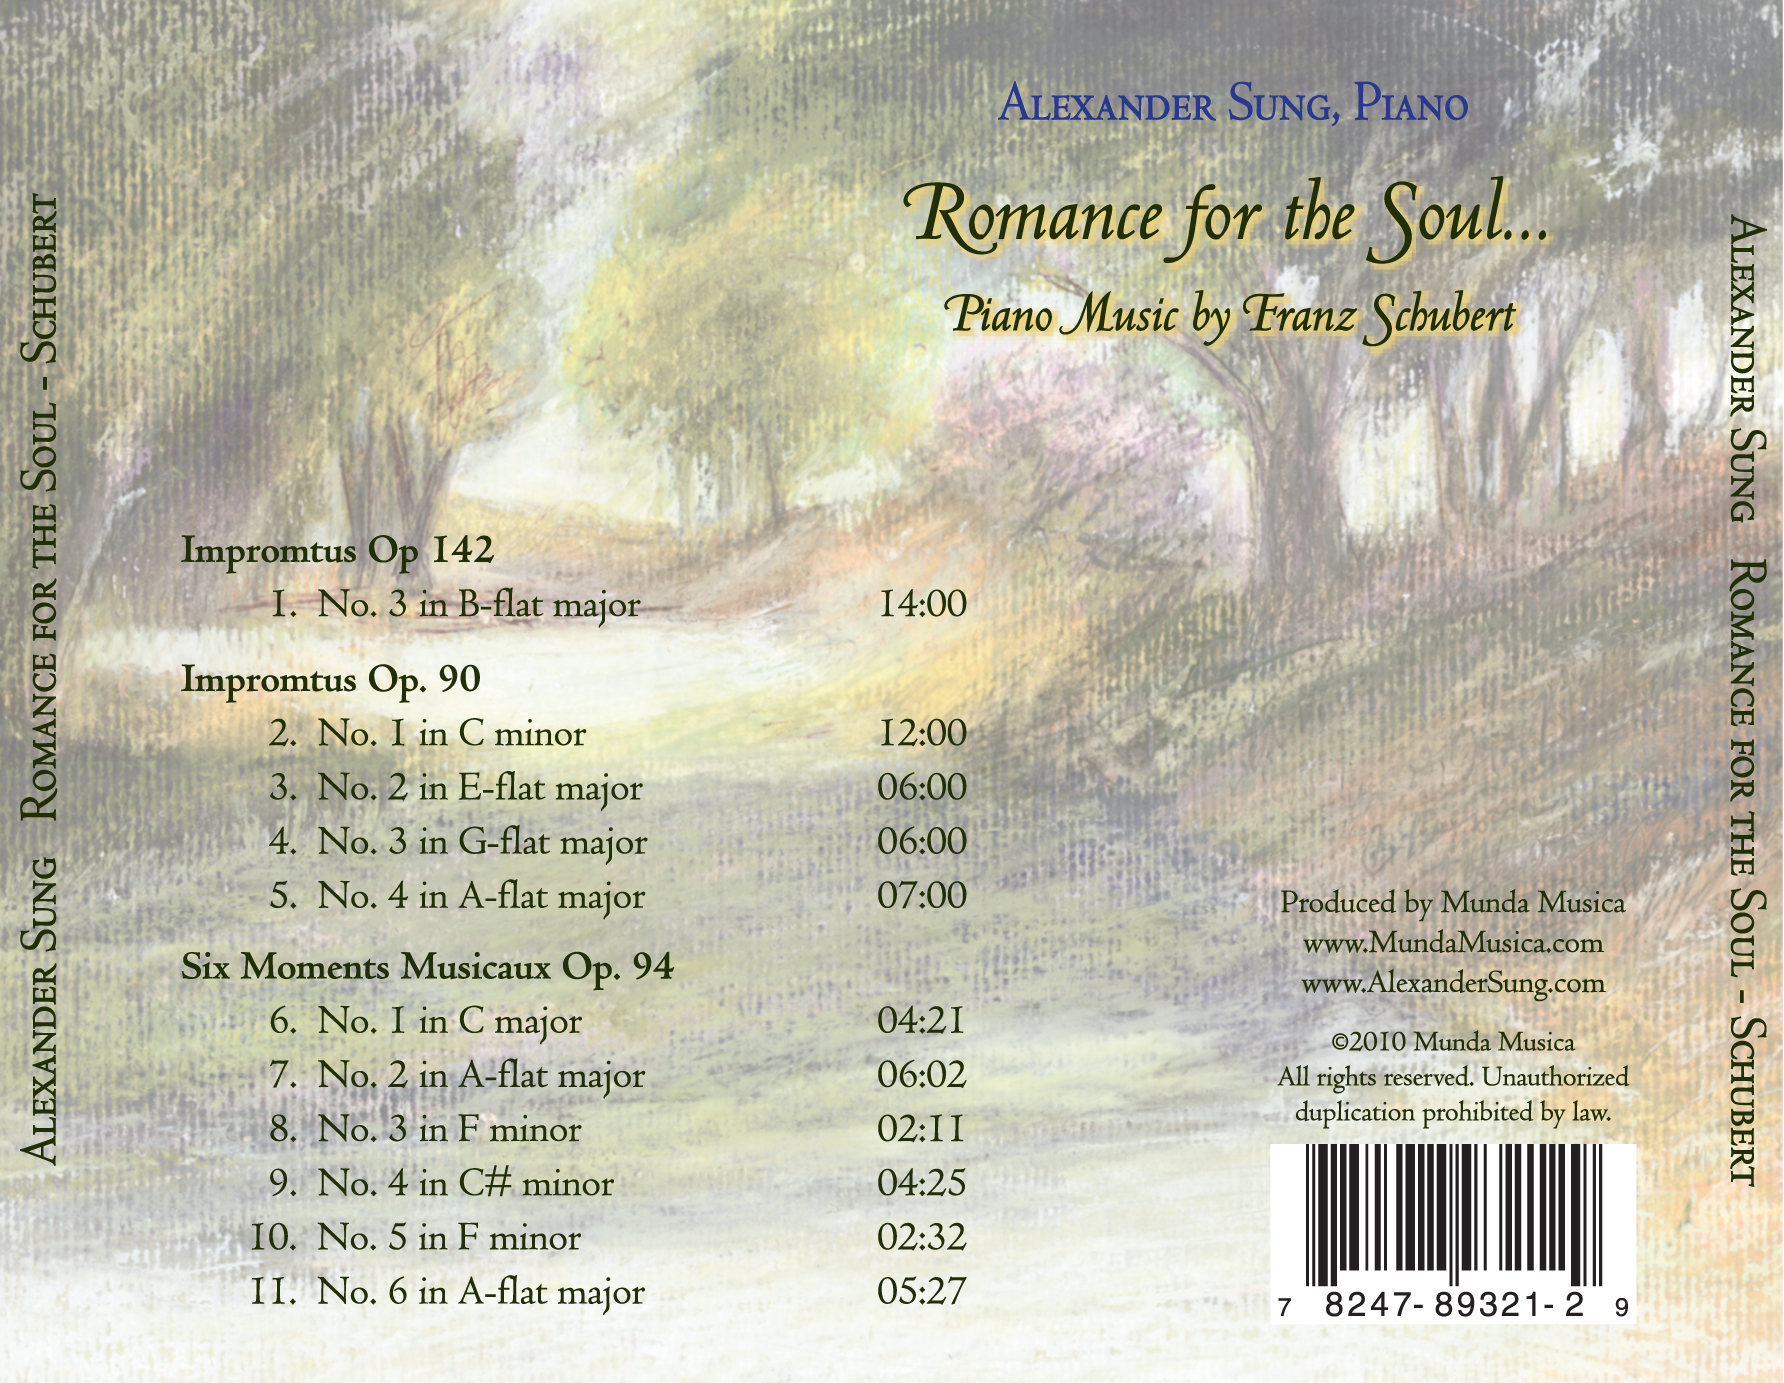 Romance of the Soul: Piano Music by Franz Schubert